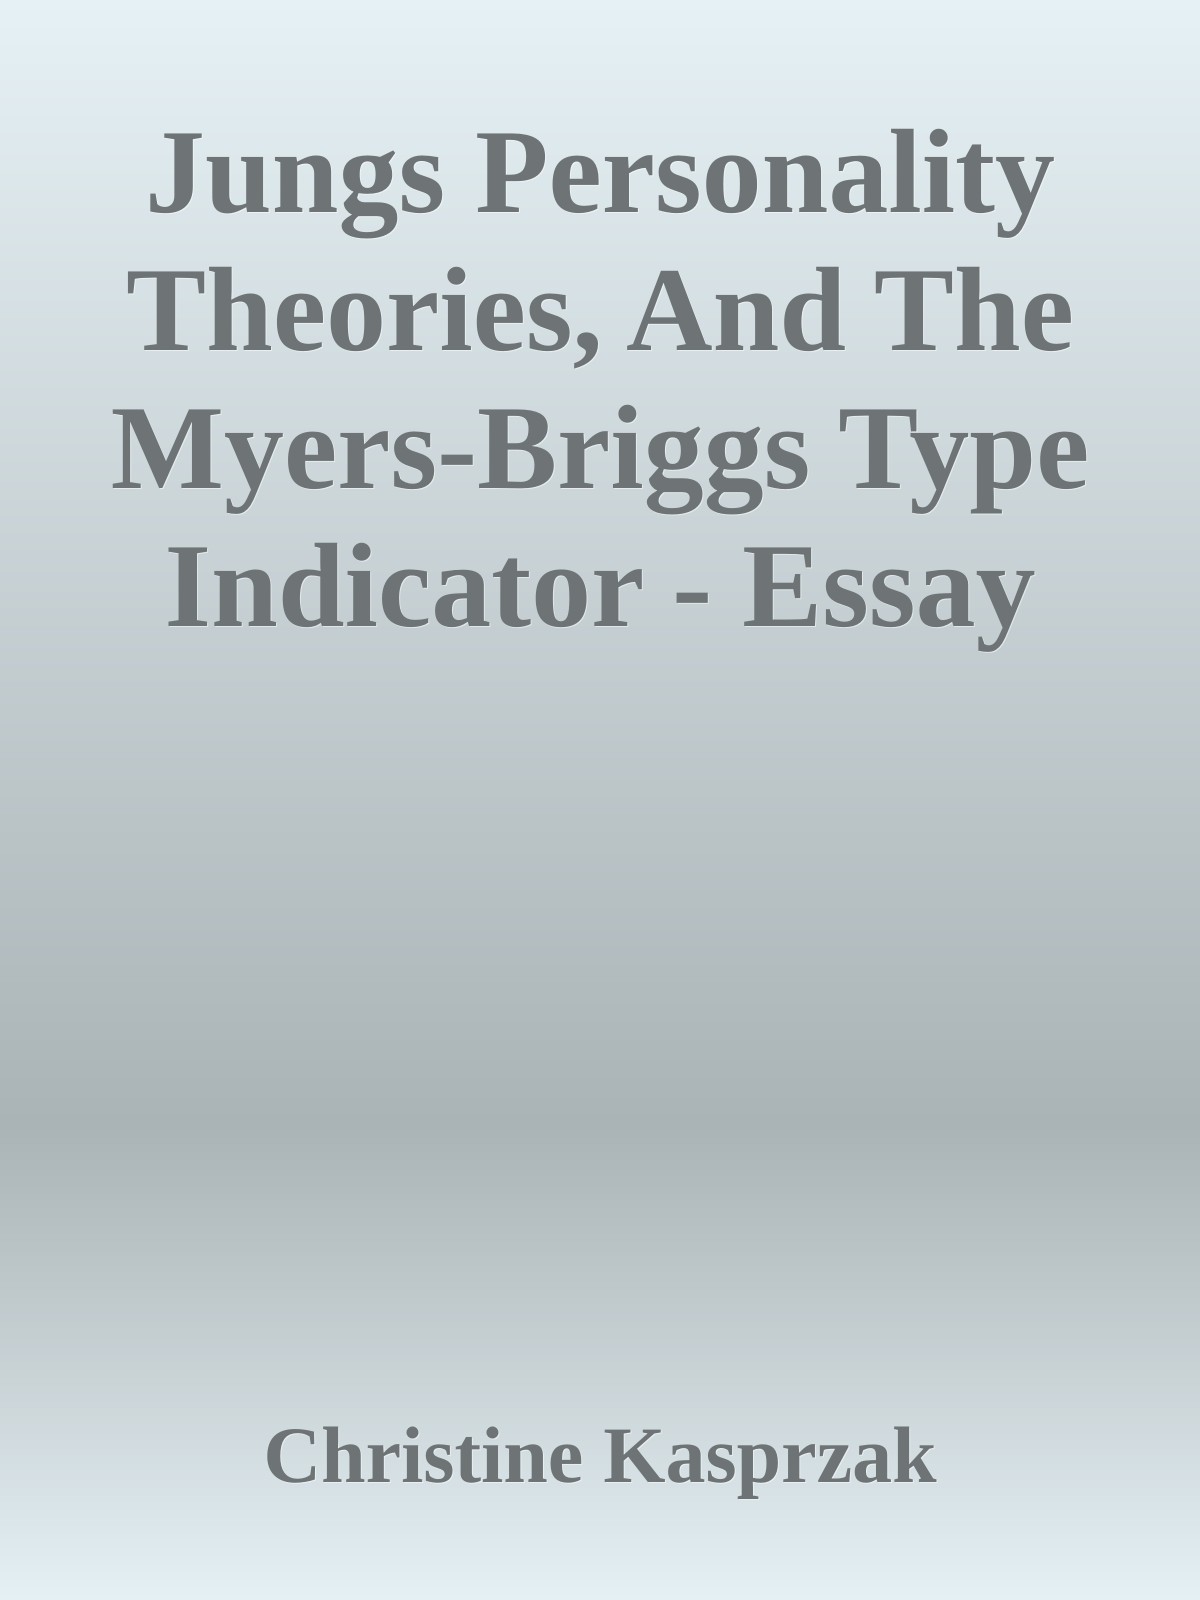 Jungs Personality Theories, And The Myers-Briggs Type Indicator - Essay